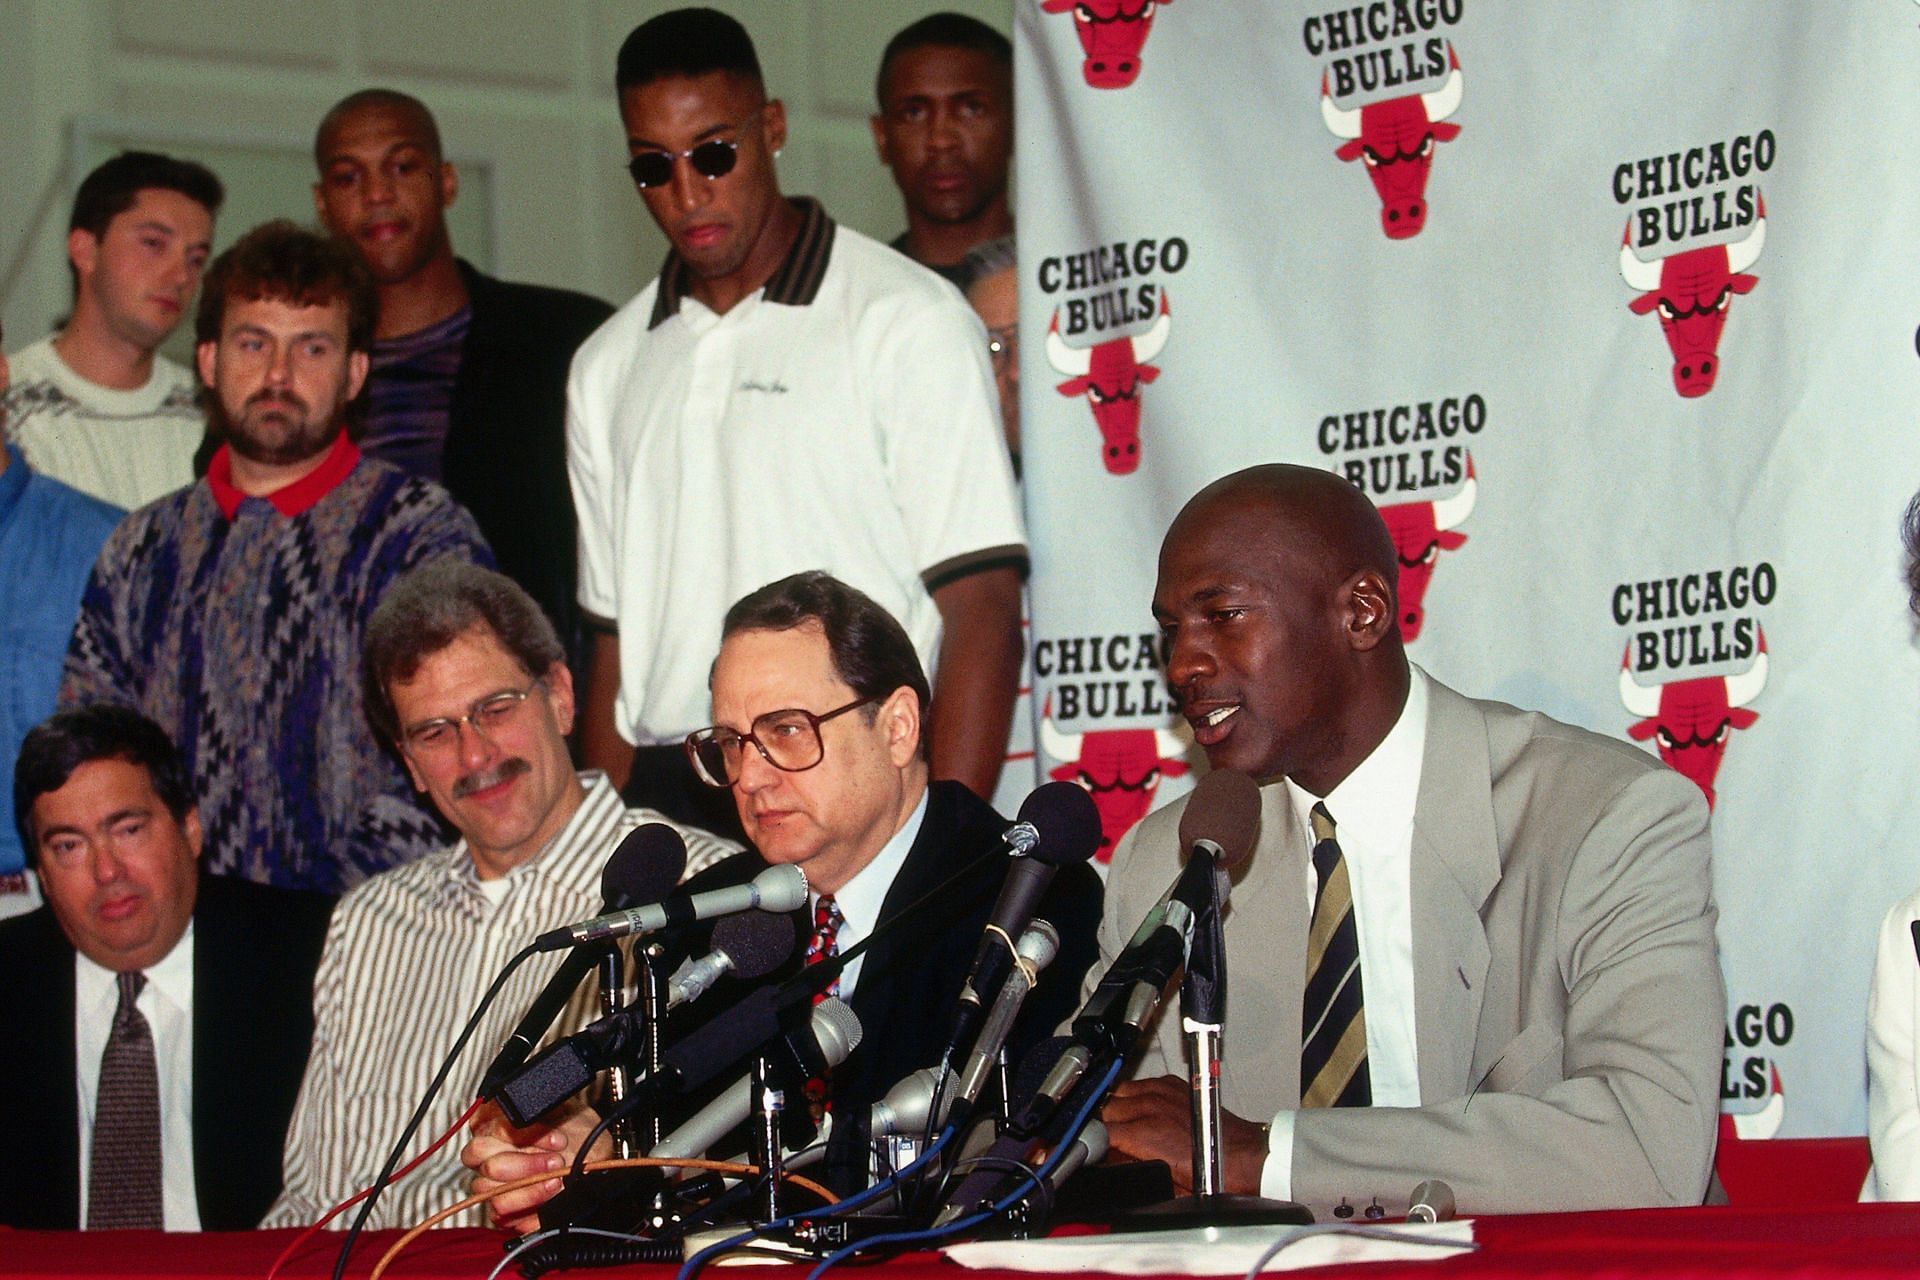 Michael Jordan stunned the basketball world when he announced his first retirement in 1993.